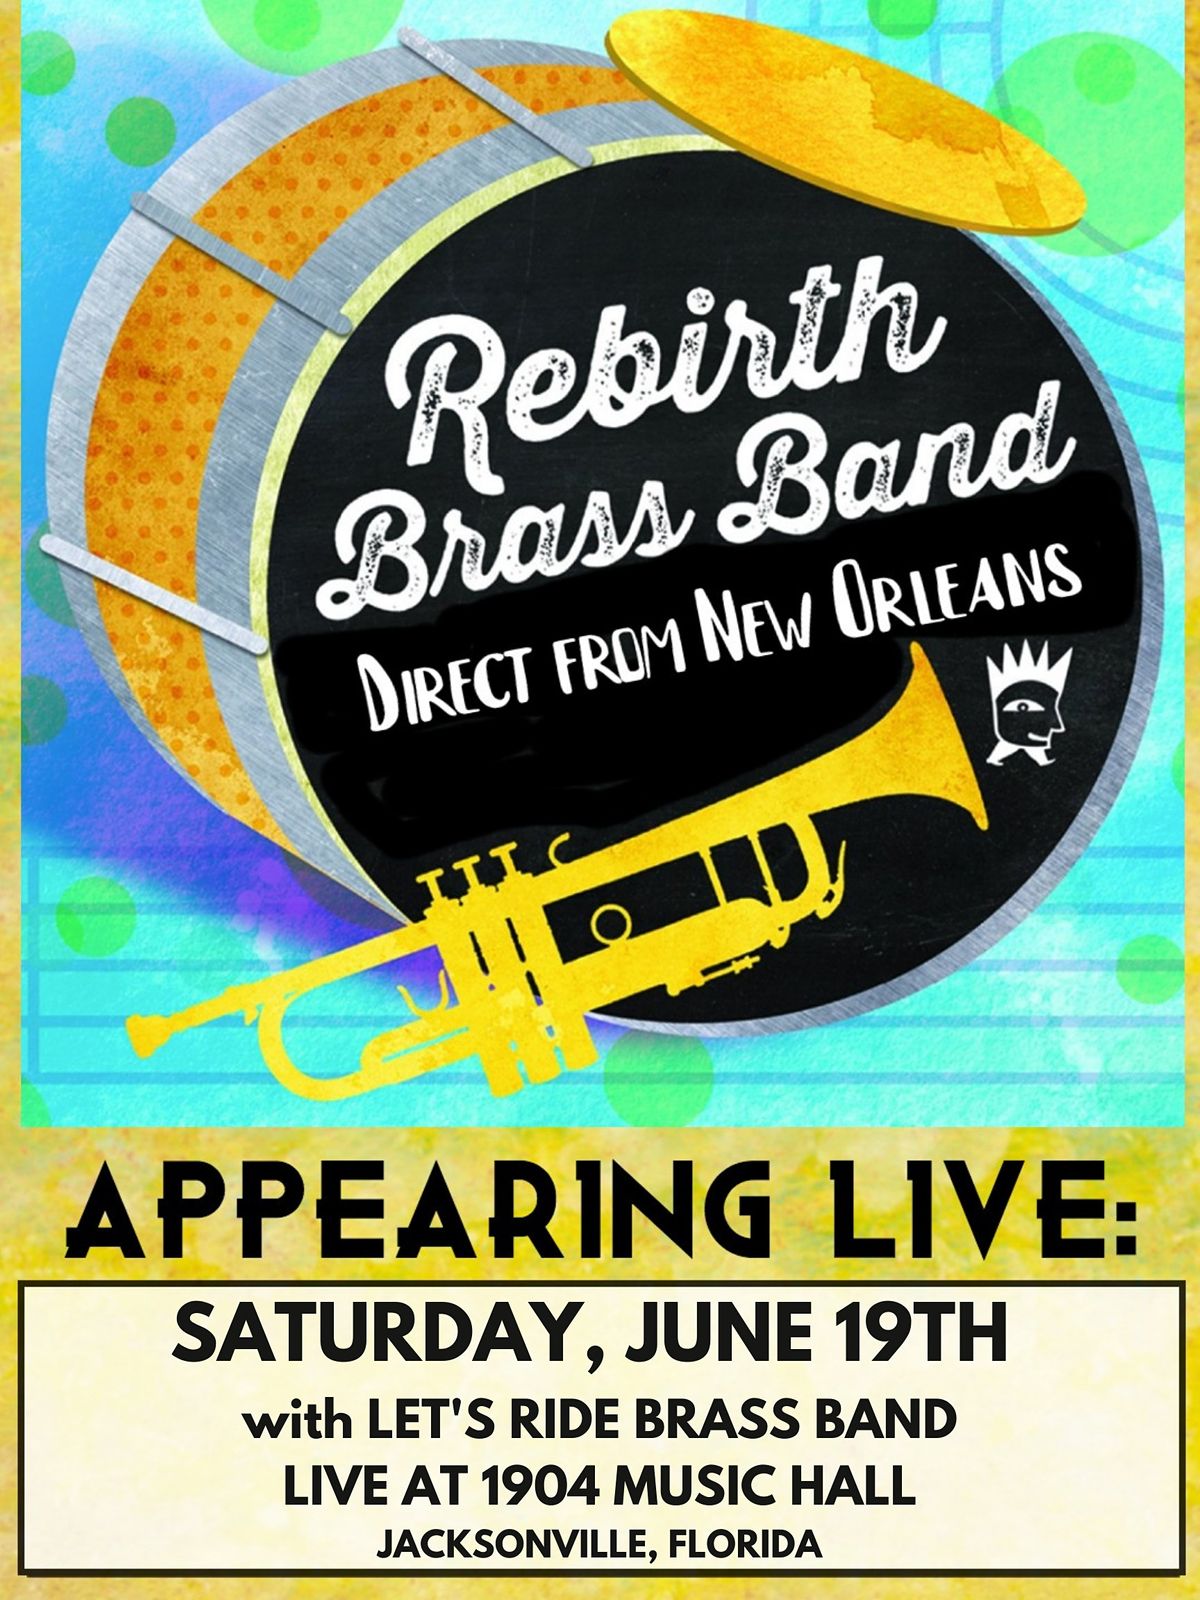 REBIRTH BRASS BAND at 1904 Music Hall with Let's Ride Brass Band